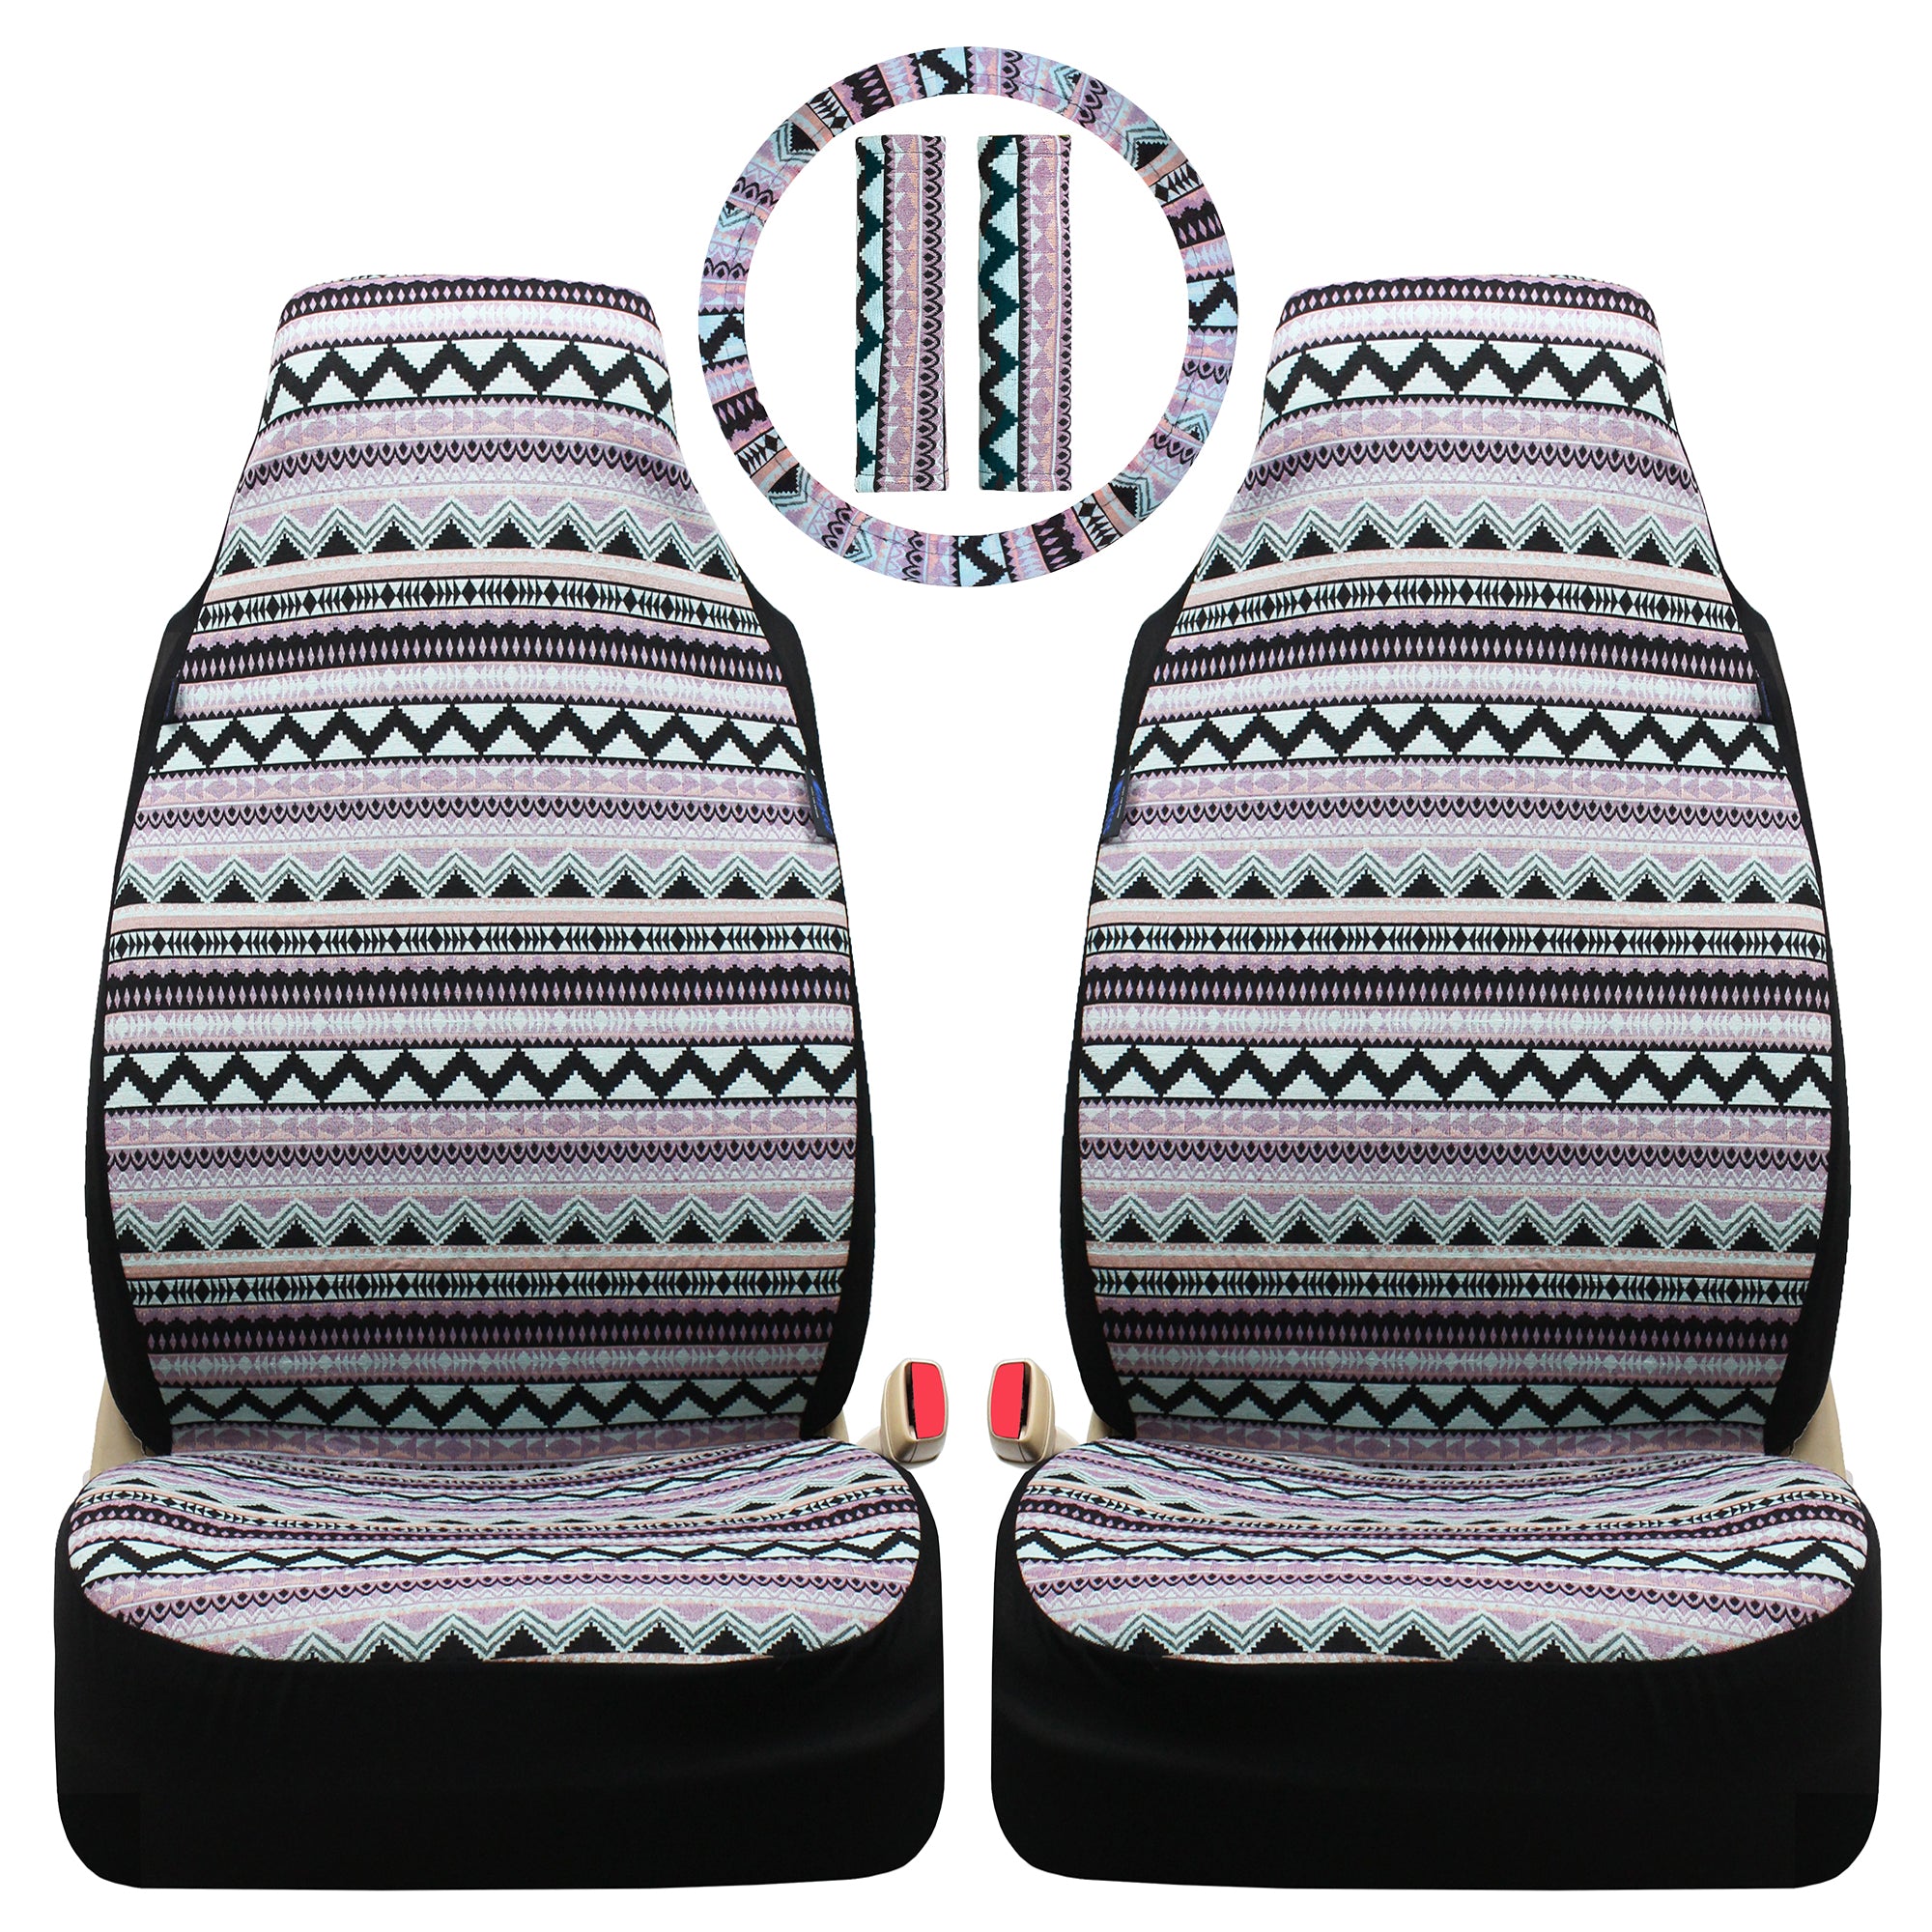 Boho Car Seat Covers for Vehicle, Car Seat Covers for Women, Seat